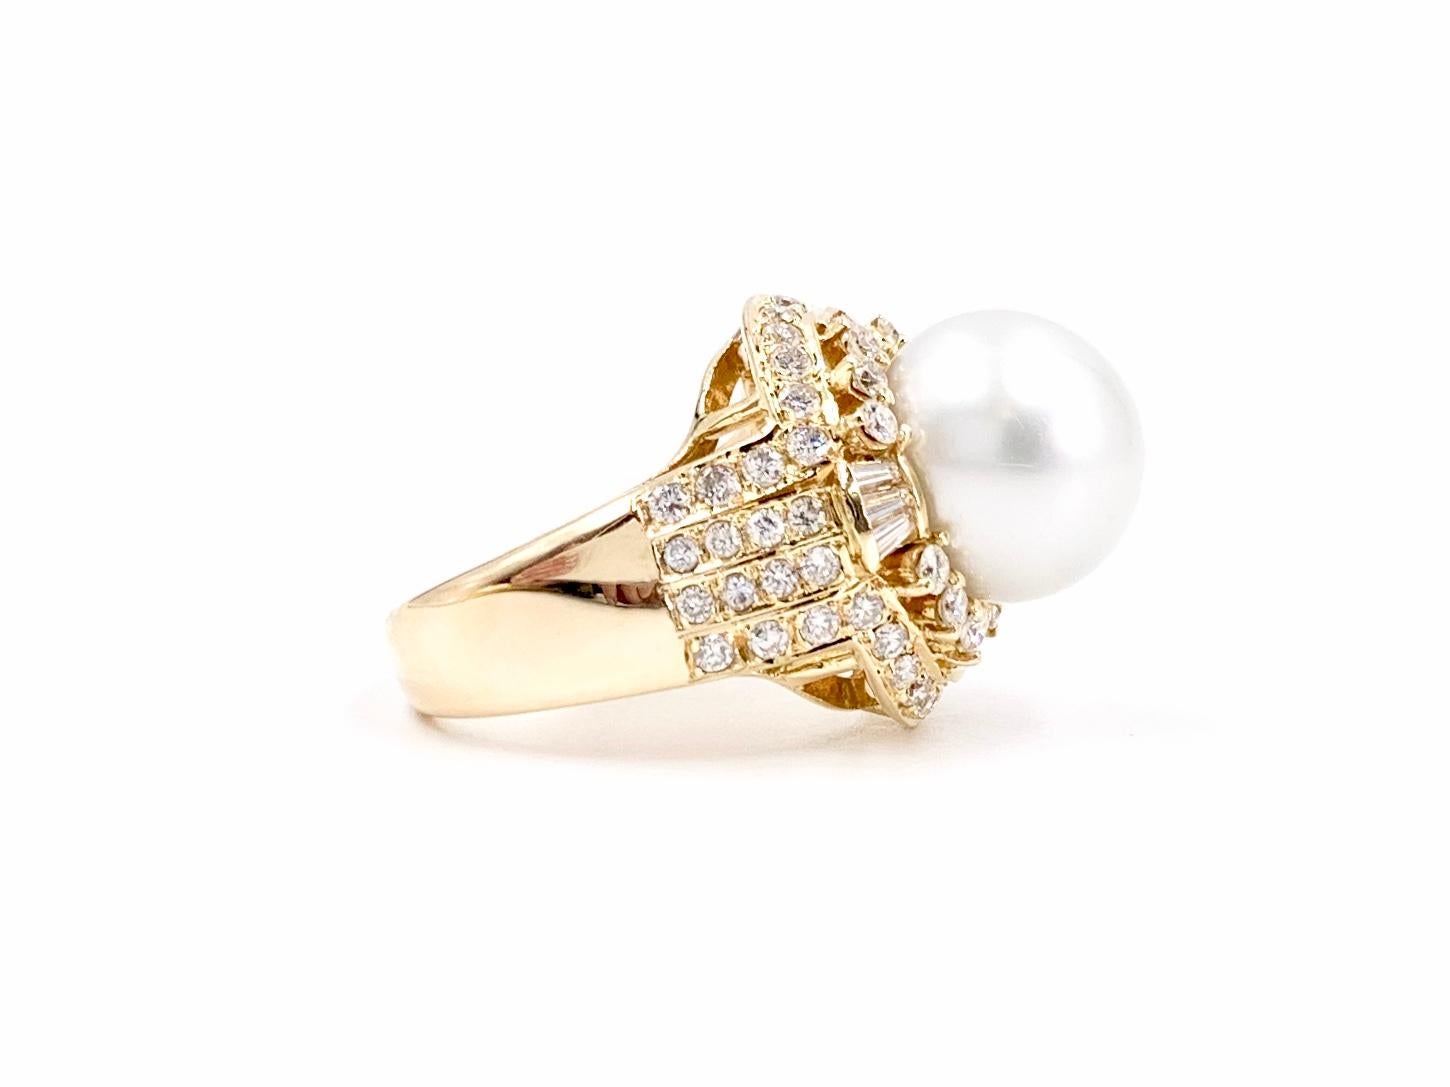 18 Karat Diamond and South Sea Pearl Ring In Good Condition For Sale In Pikesville, MD